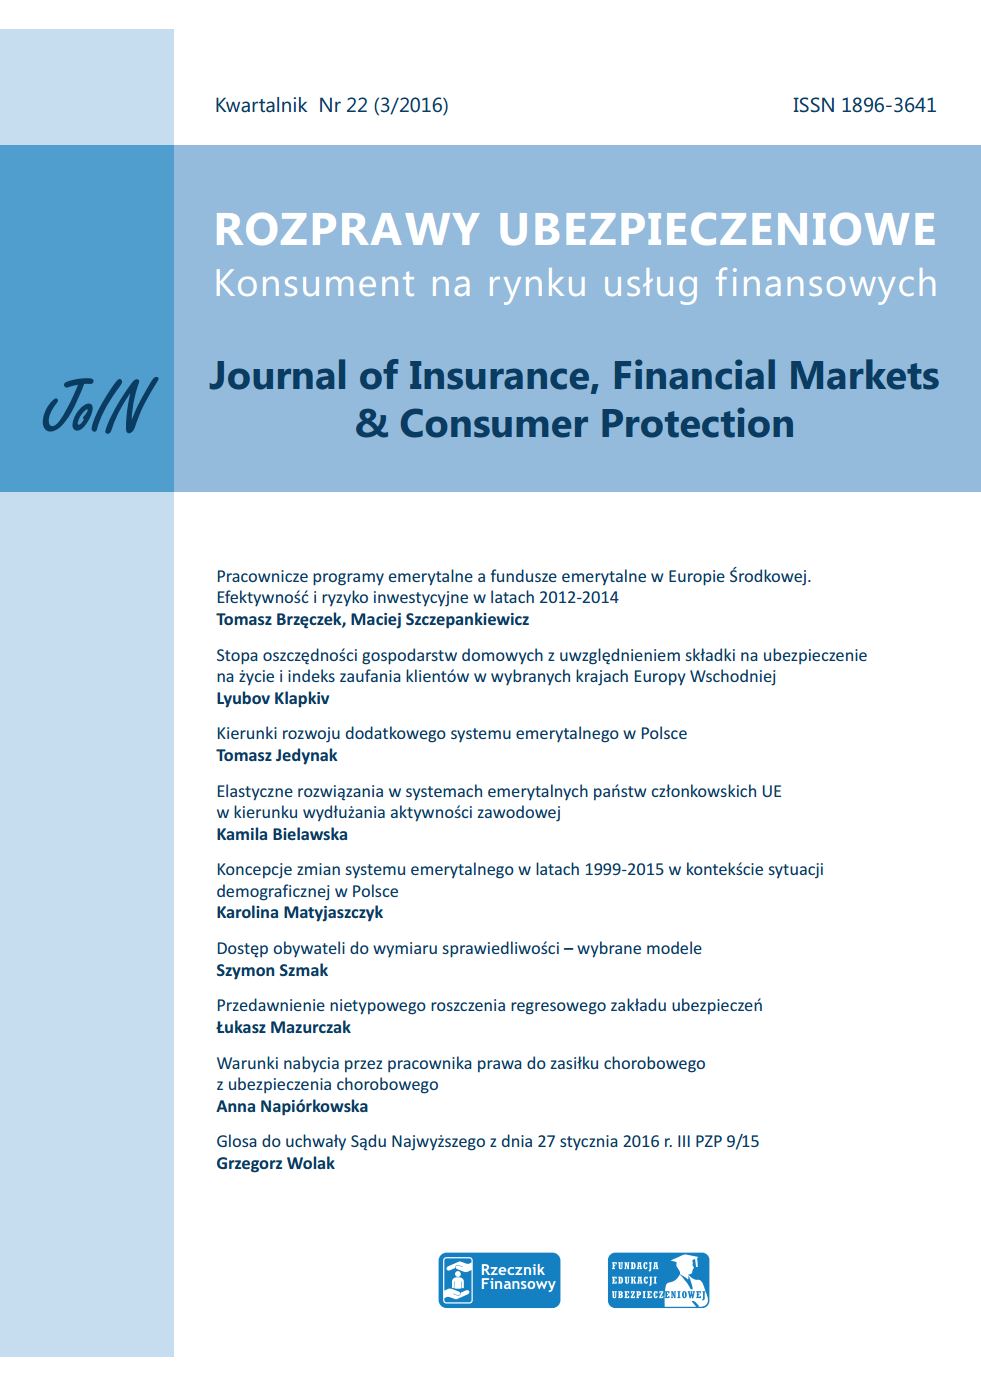 Household saving rate including life insurance premiums and consumer confidence index in selected Eastern European countries Cover Image